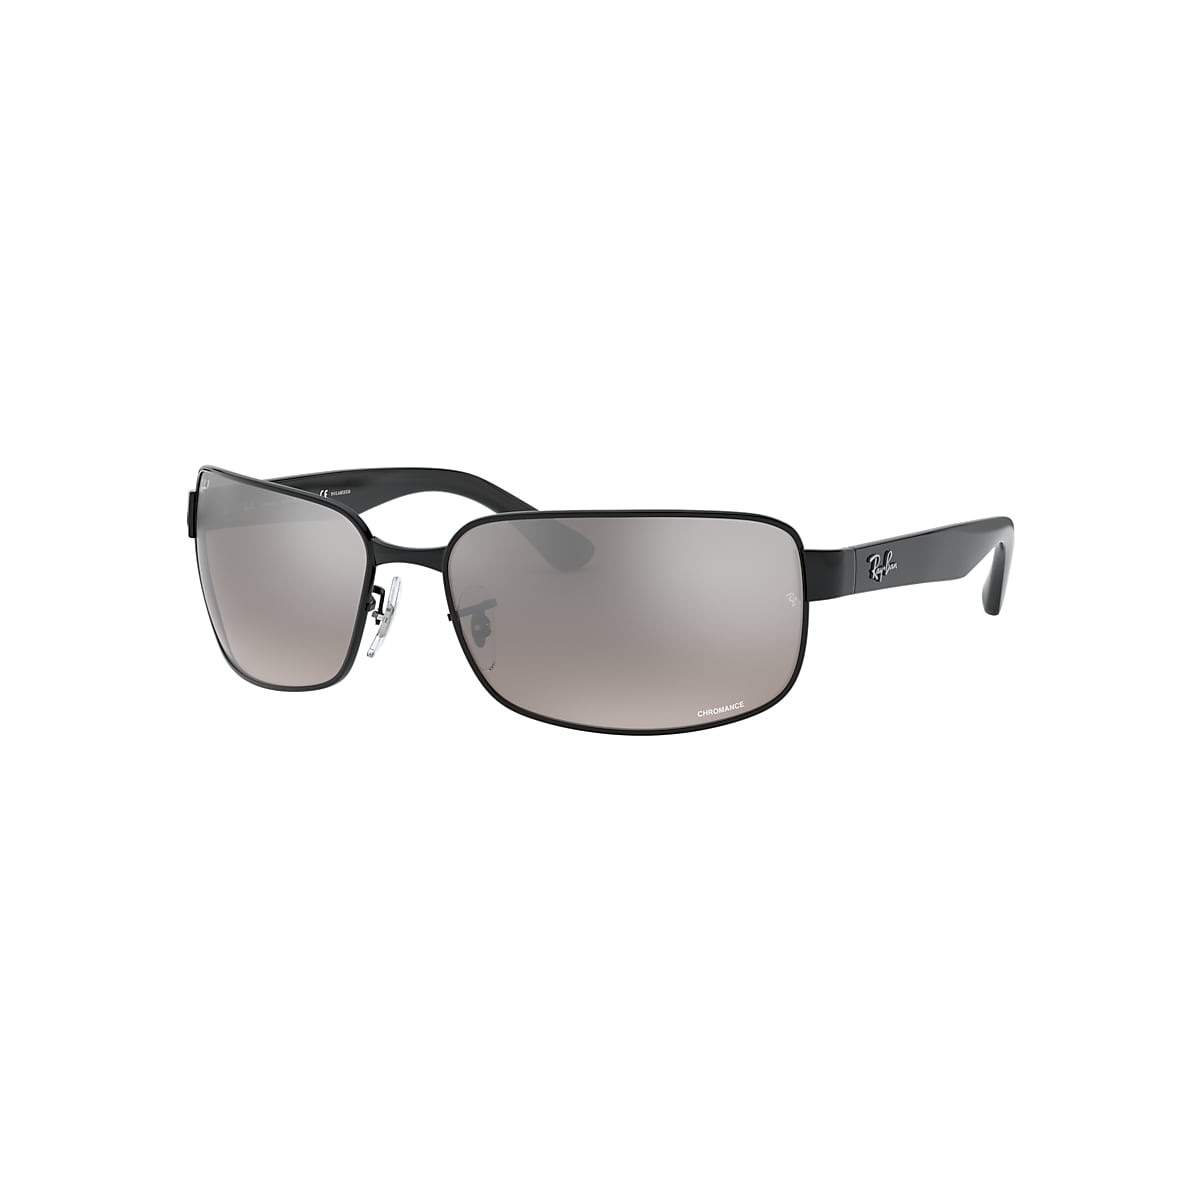 RB3566CH CHROMANCE Sunglasses in Black and Silver - Ray-Ban